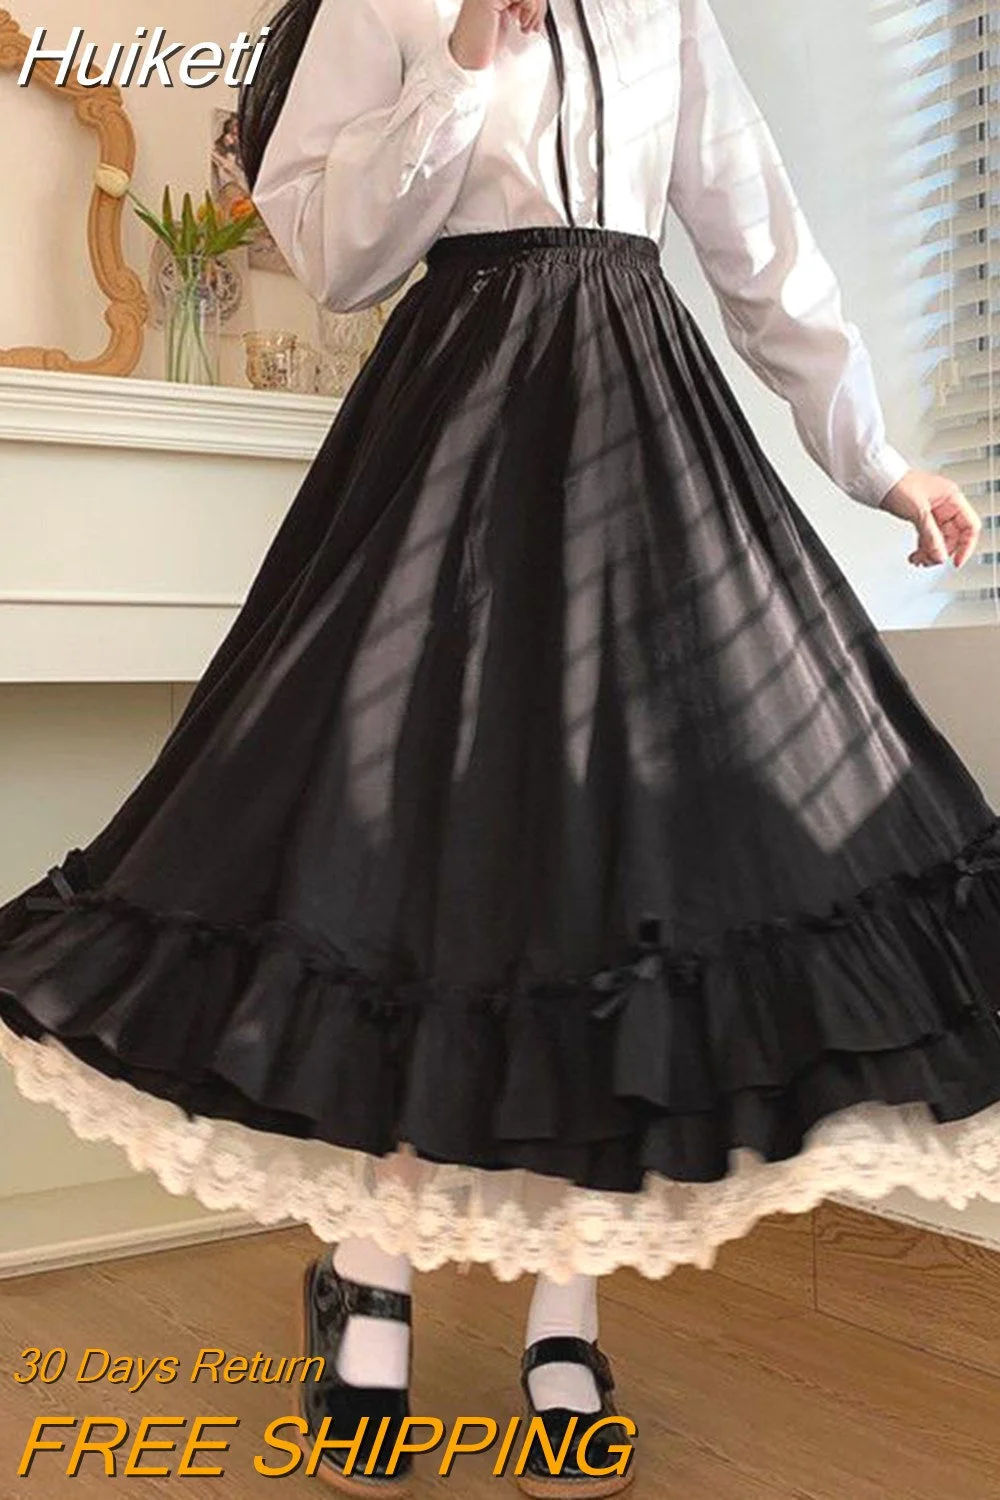 Huiketi Sweet Japanese Long Skirt Solid Color Double Layer Vintage French Ruffled A-Line Pleated Skirt Hepburn Black Lace Skirt